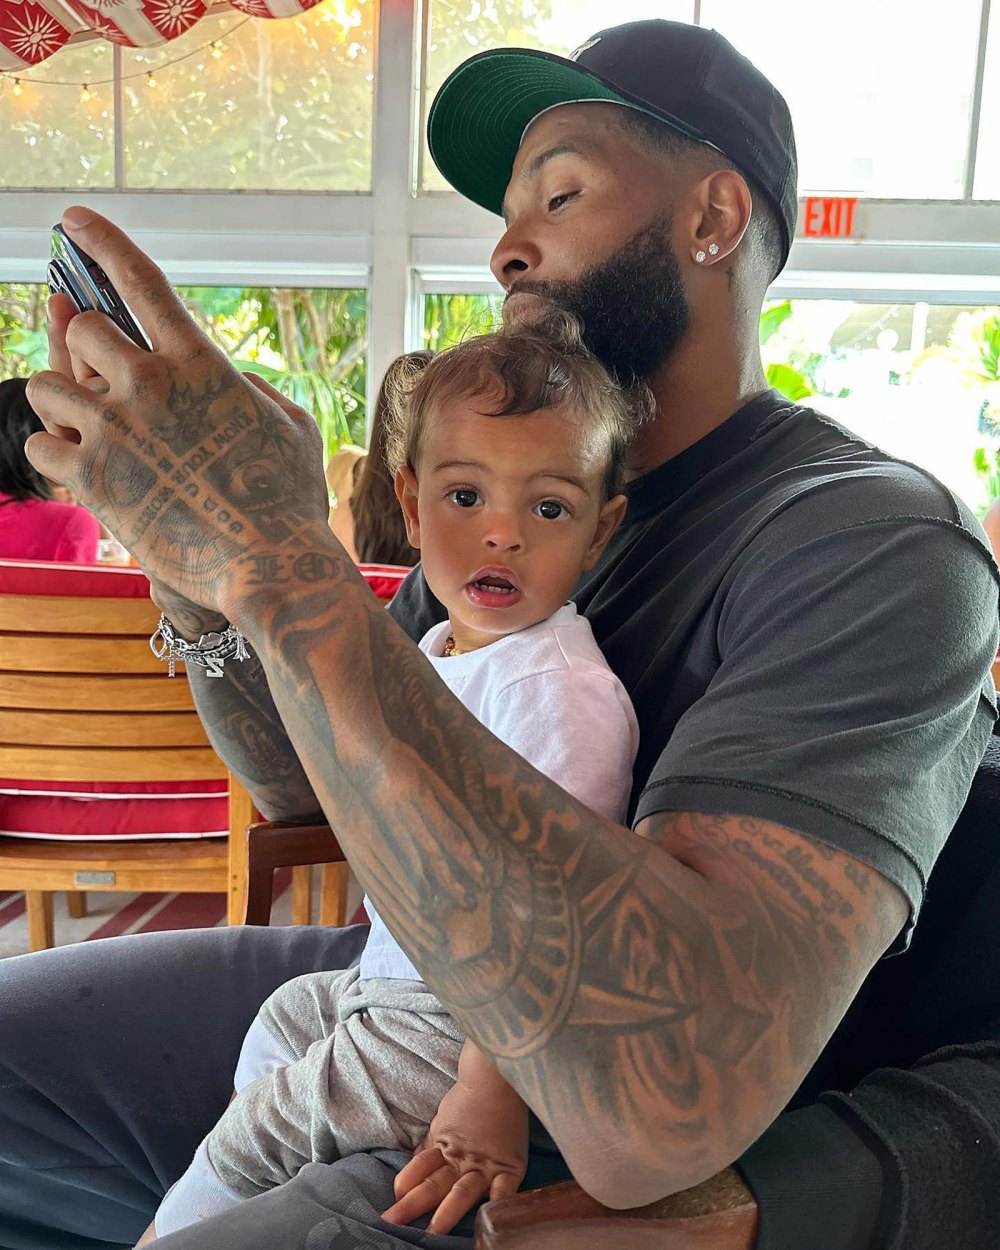 NFL star Odell Beckham Jr. and Love Island USA personality Kordell Beckham's family guide